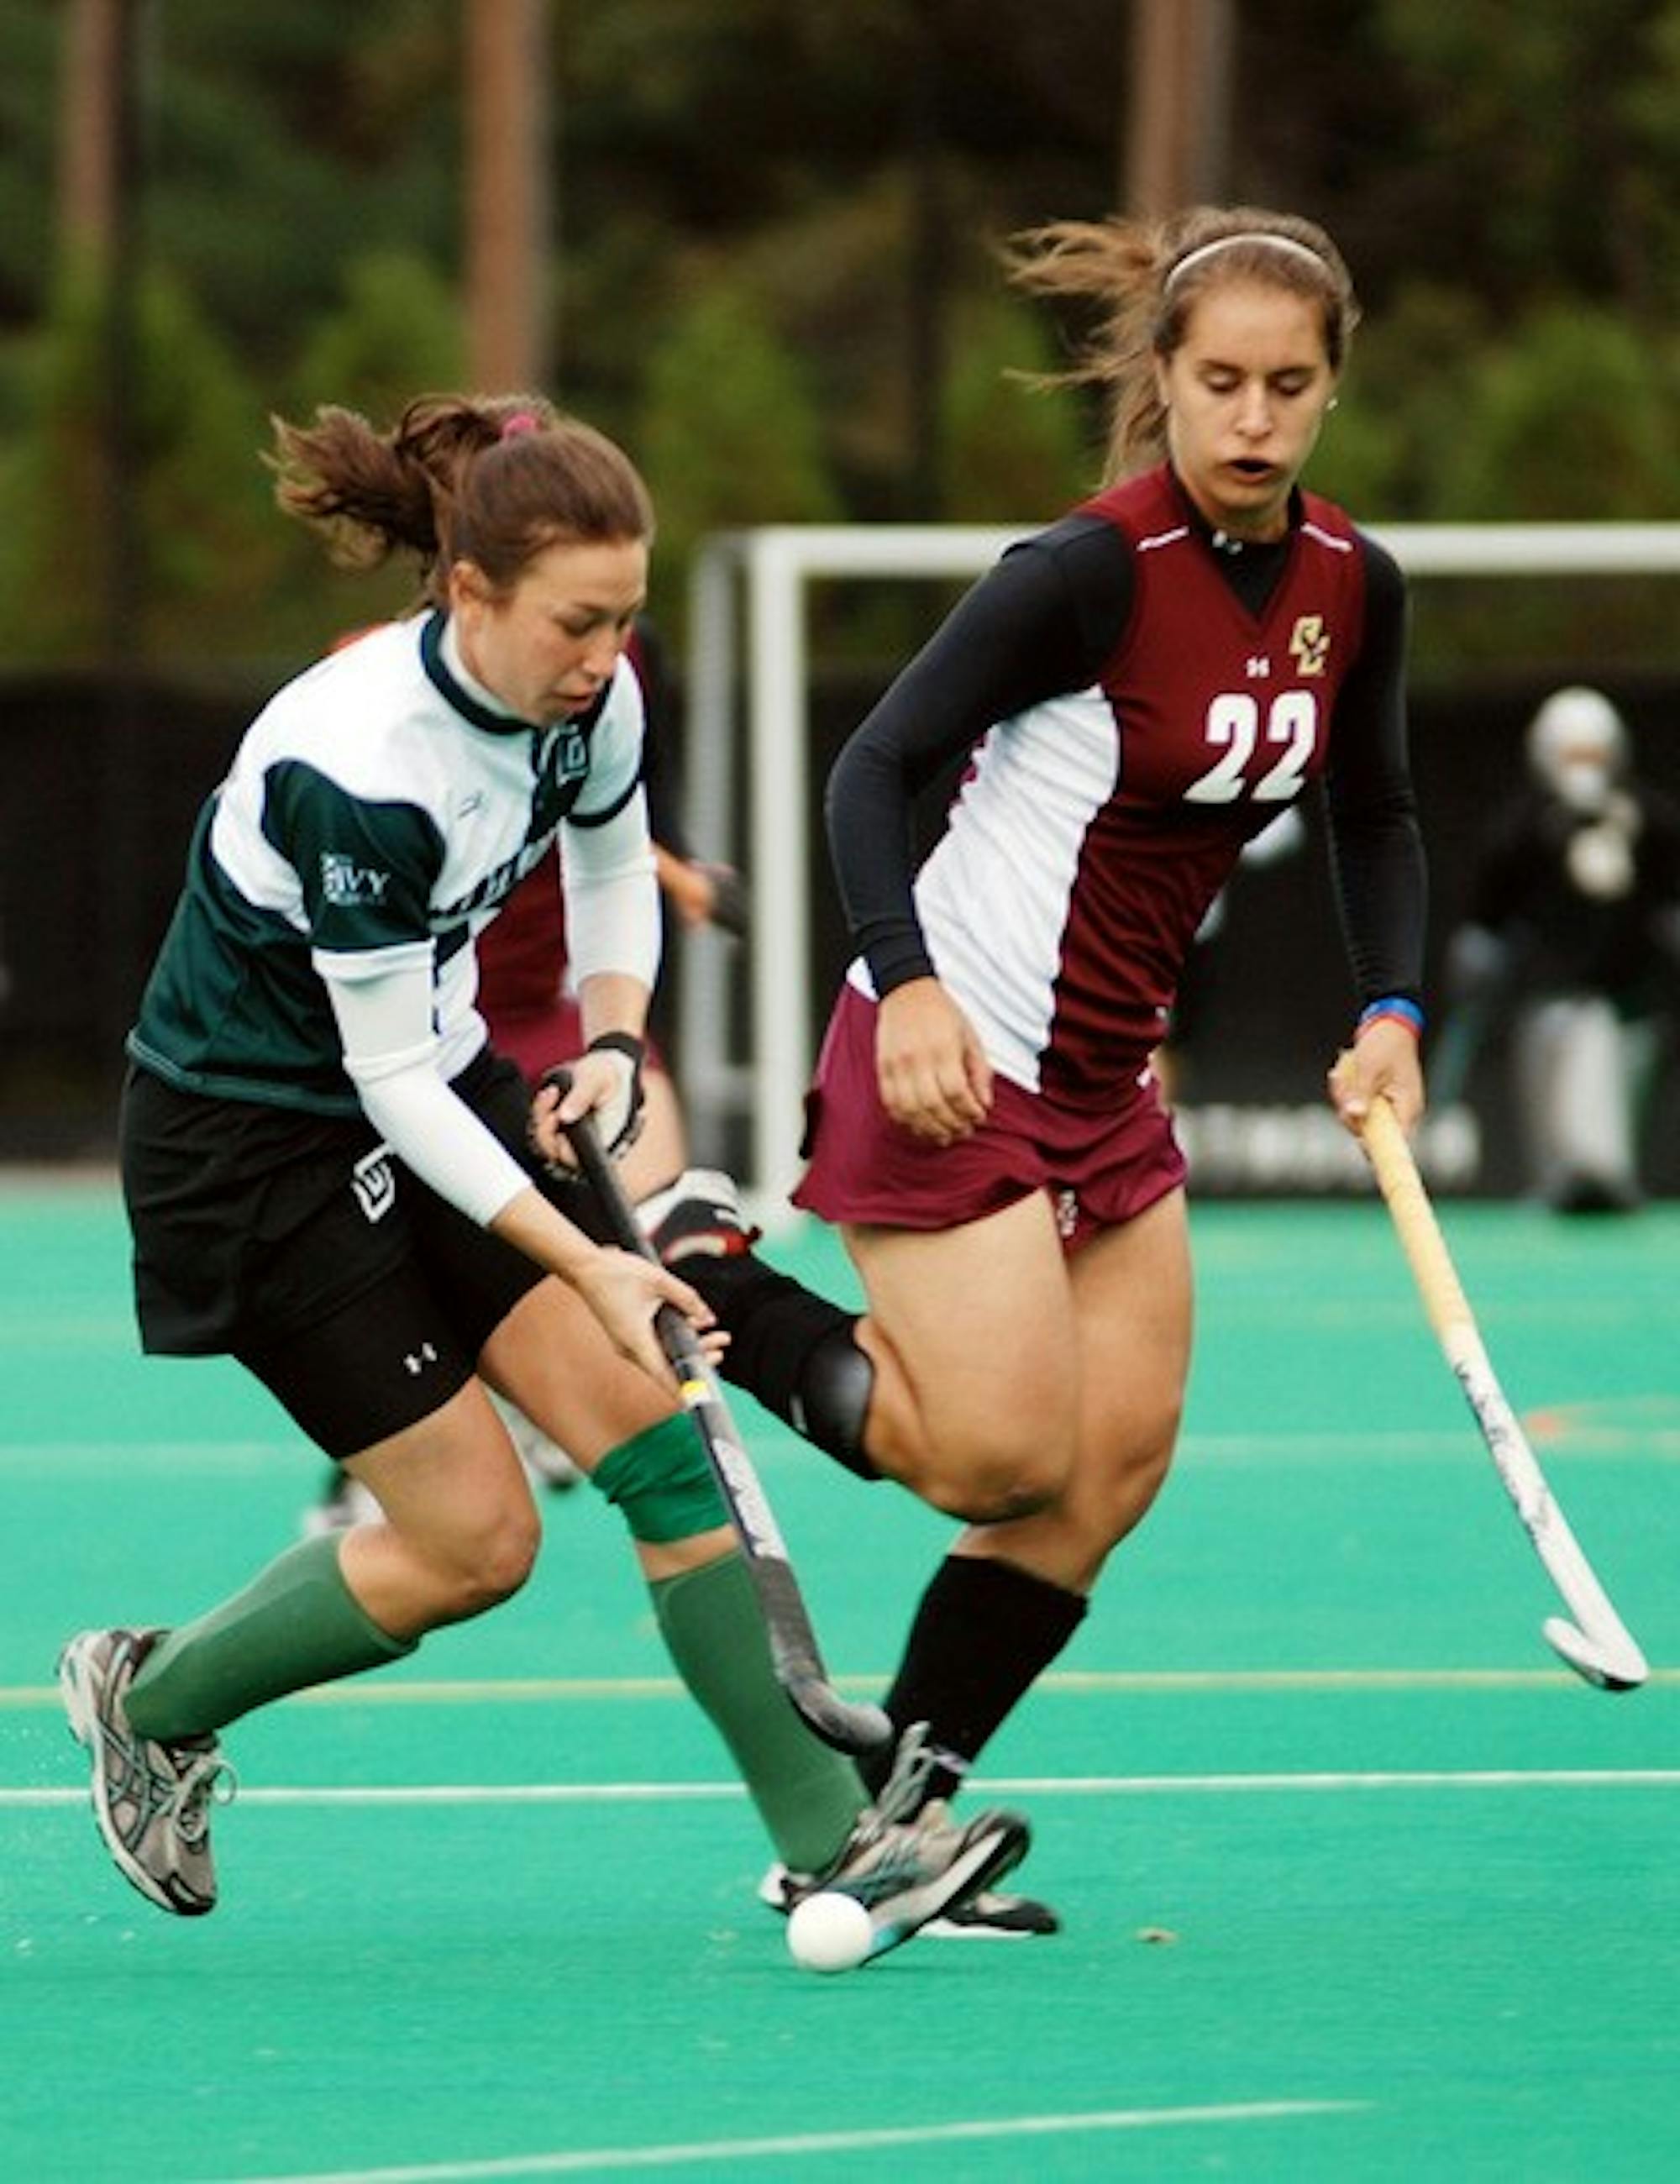 Lizzie Blidner '08 controls the ball against some aggressive defense.